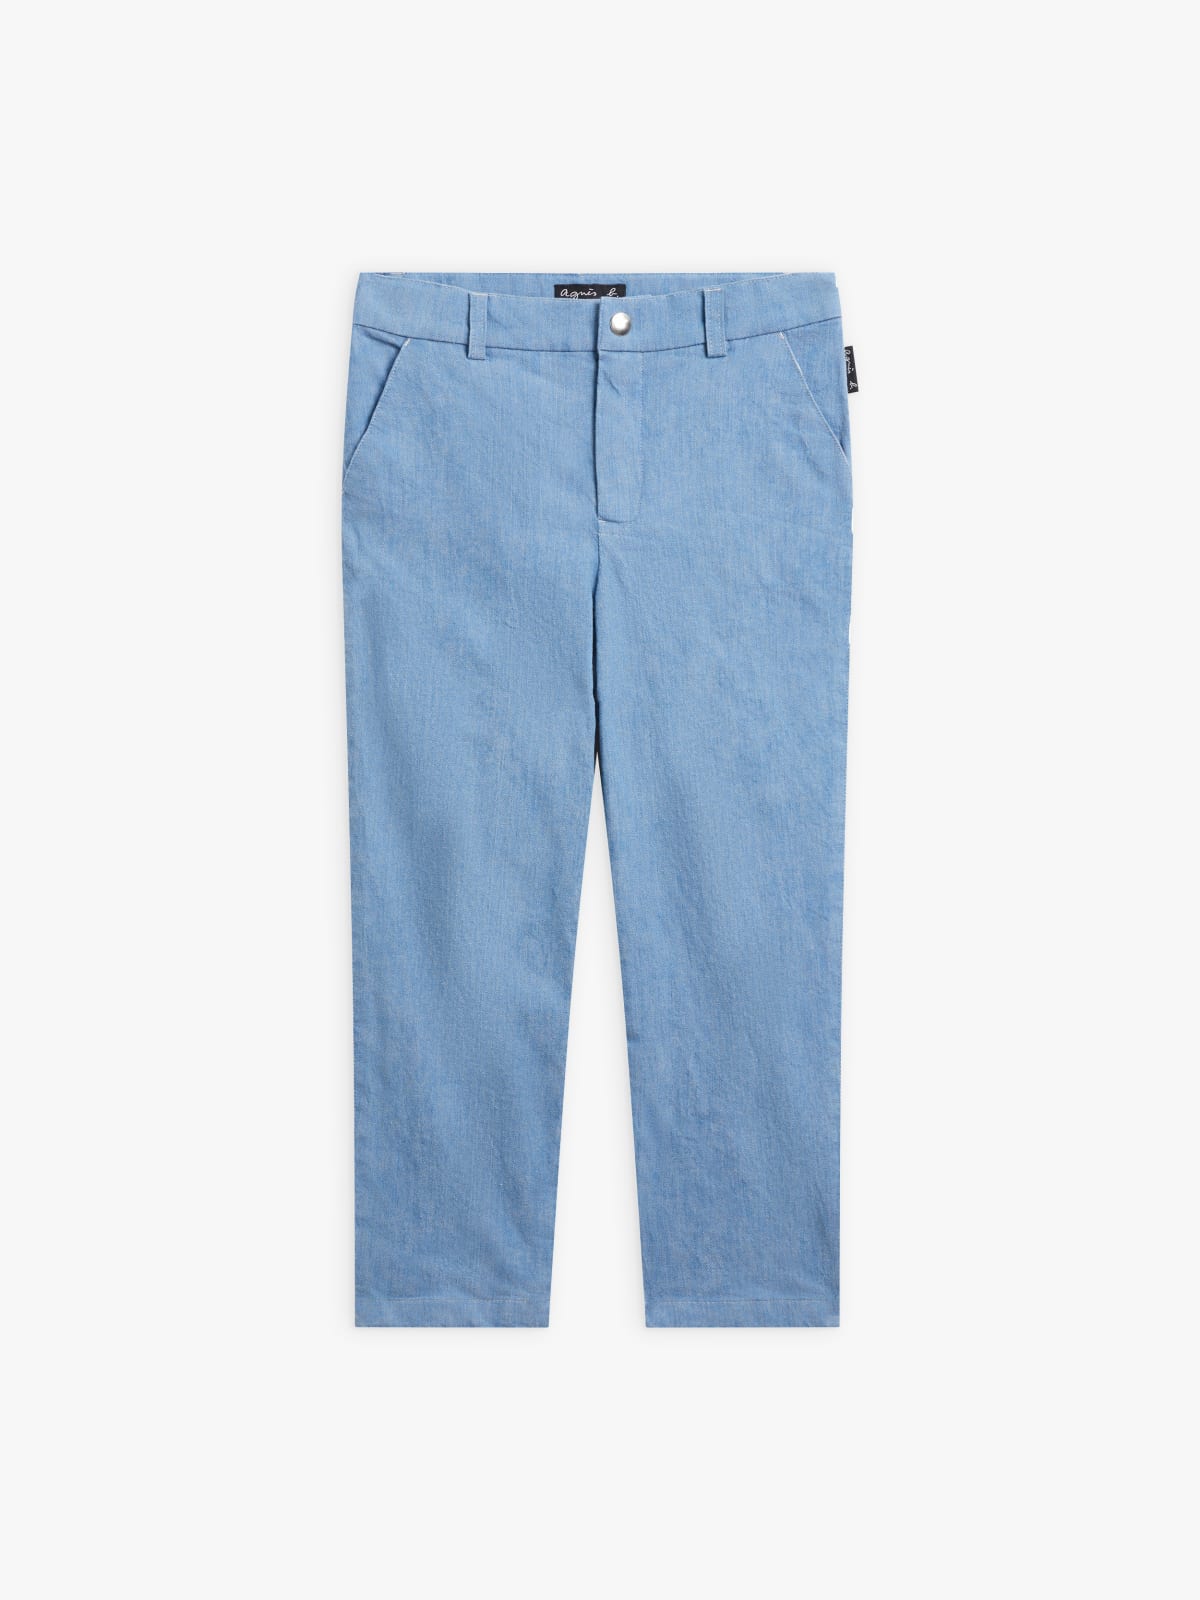 jeans cotton and linen striped Chino trousers